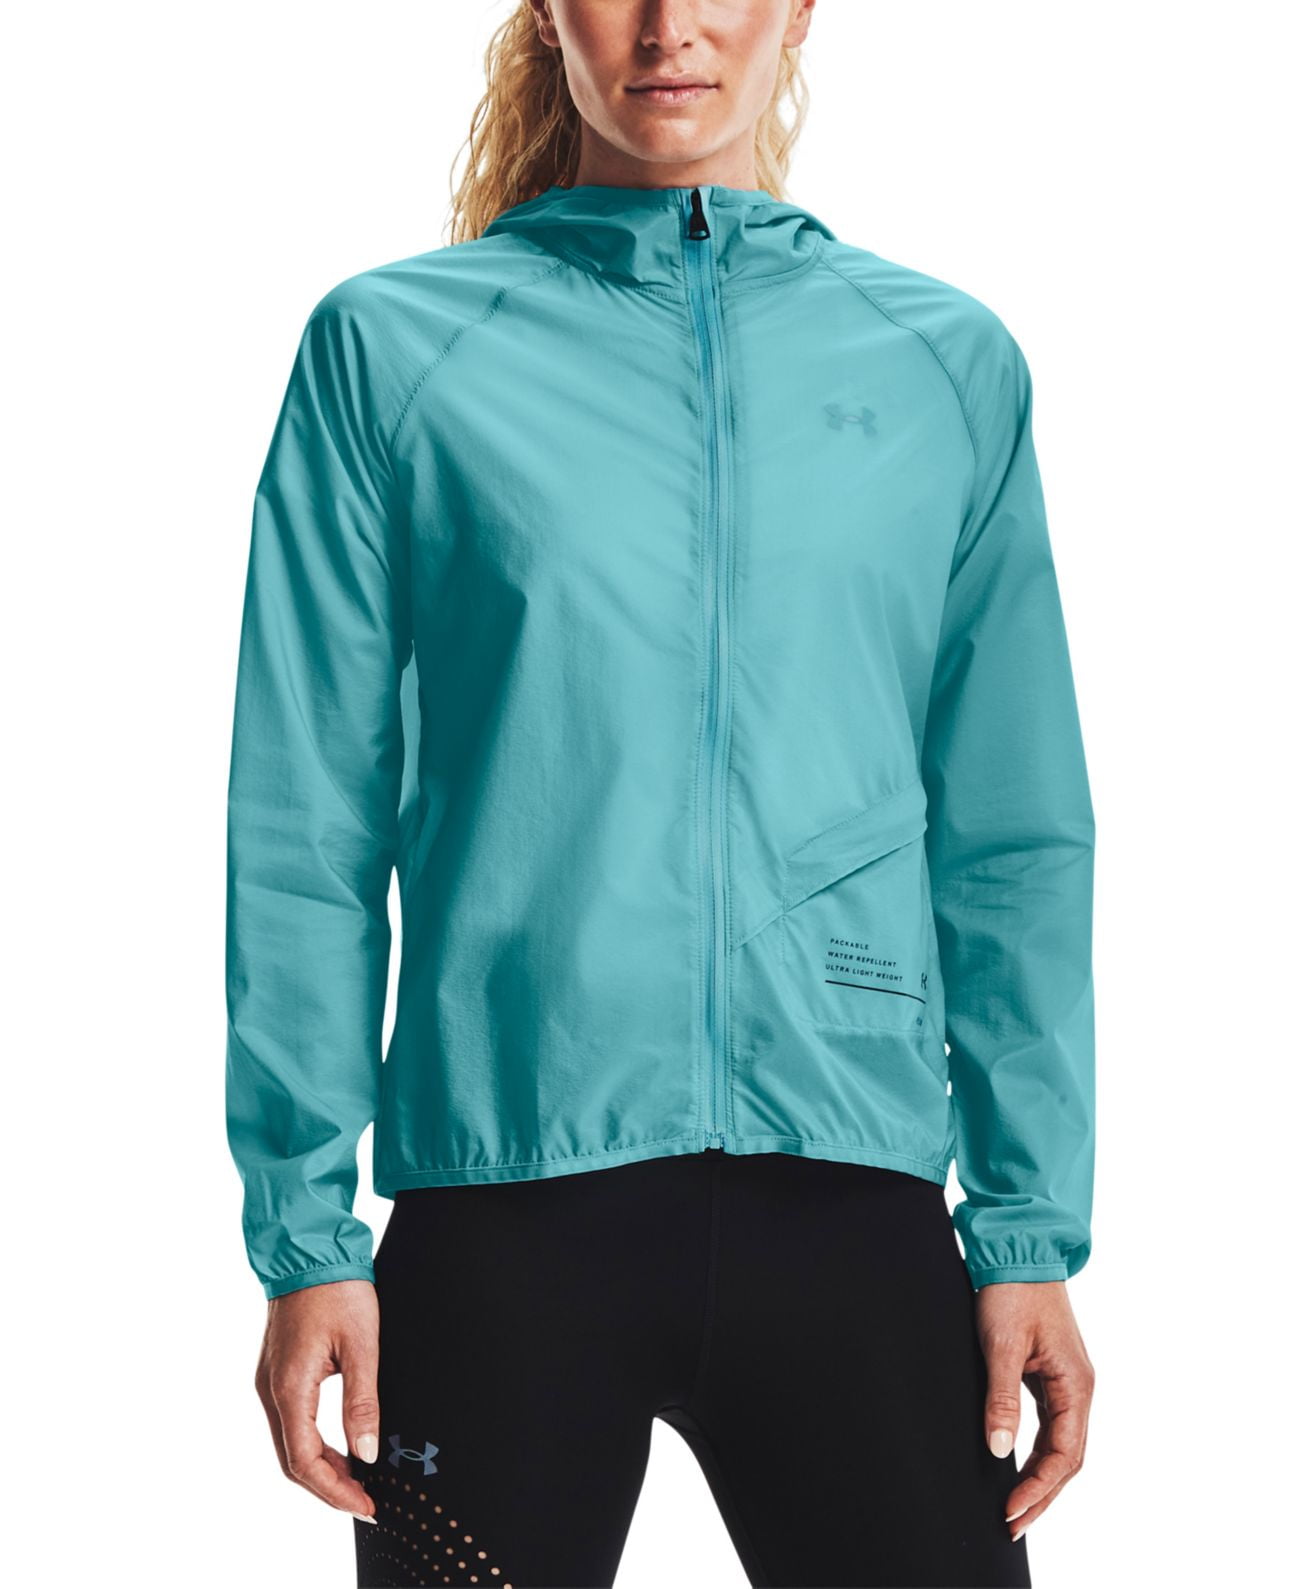 NWOT UNDER ARMOUR Womens UA Storm Anemo Jacket Small S Lightweight Fx30 